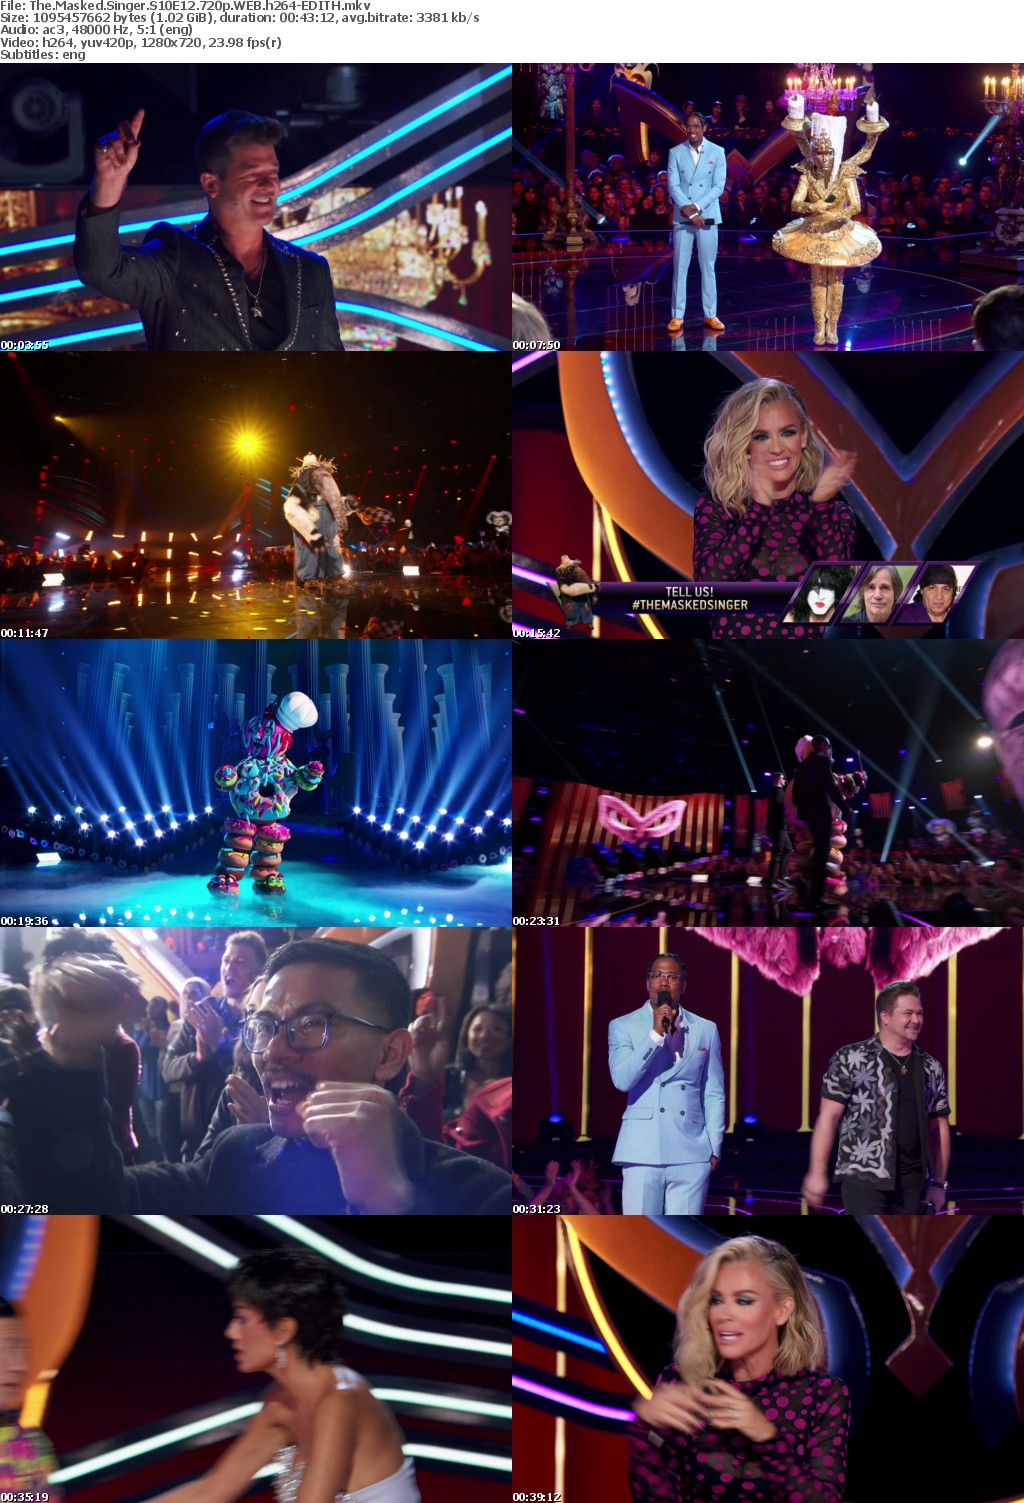 The Masked Singer S10E12 720p WEB h264-EDITH